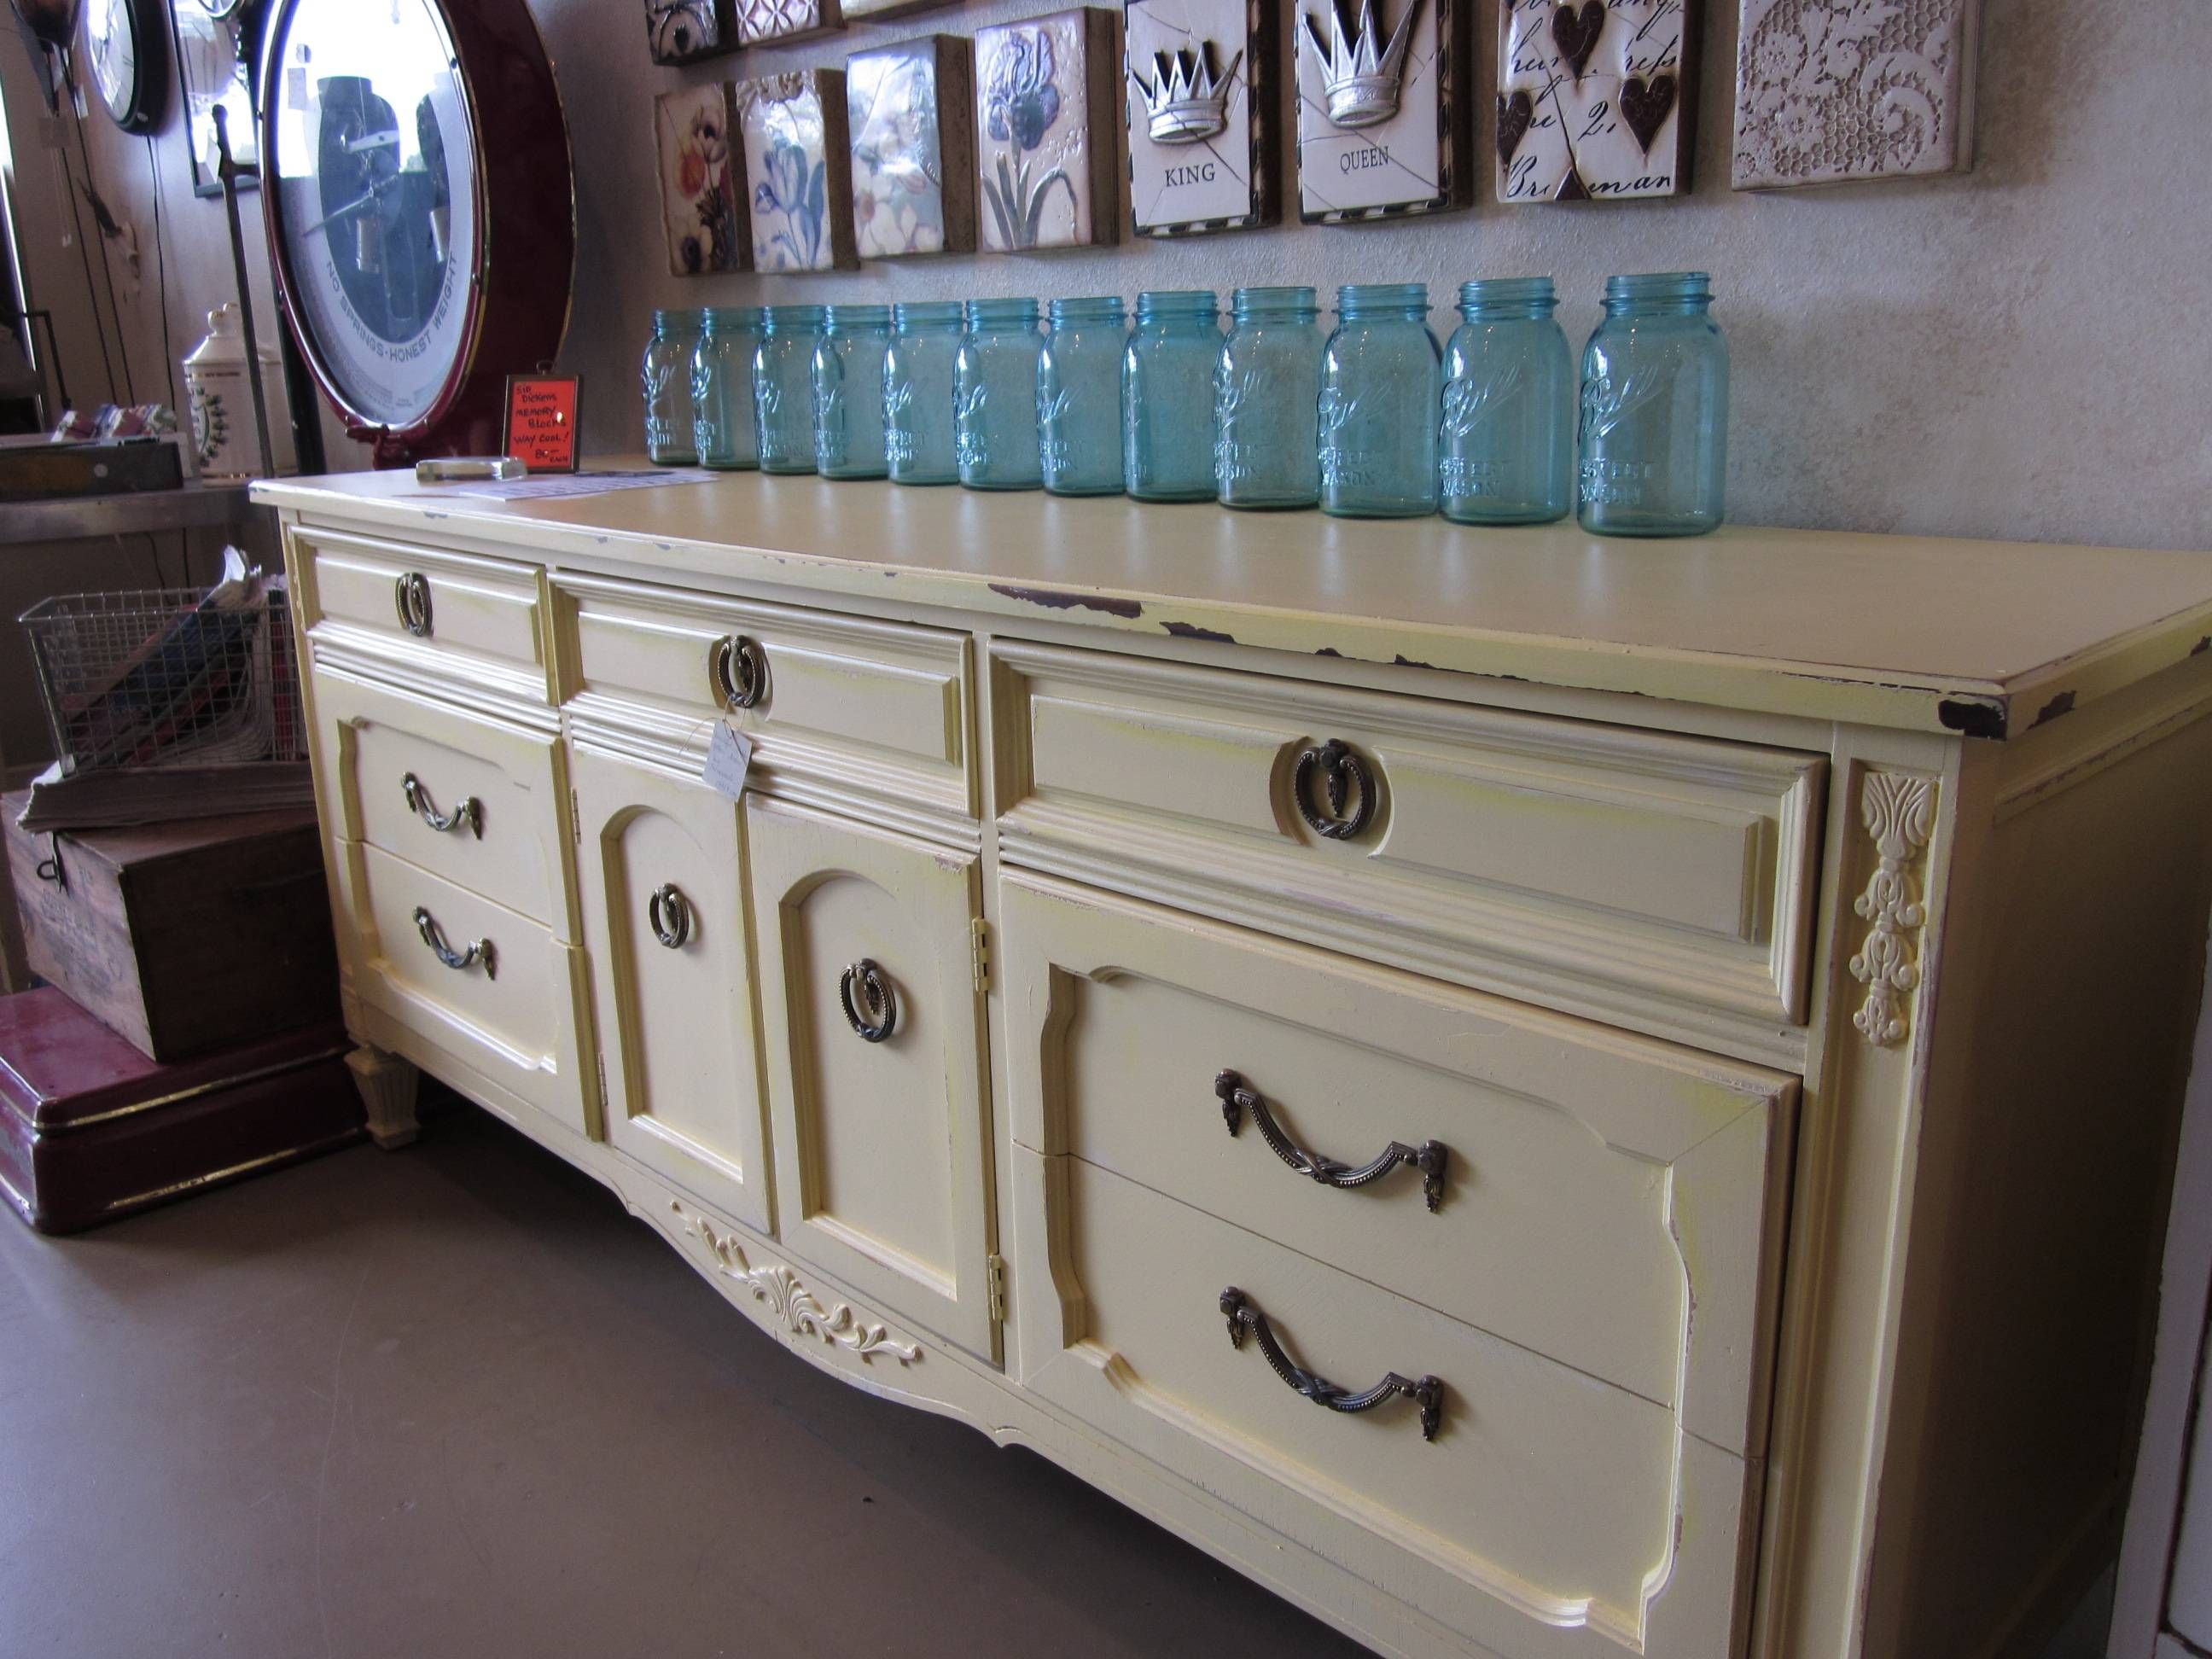 New Arrival  Thomasville Buffet/sideboard (sold) | Paper Street Market With Regard To Best And Newest Thomasville Sideboards (View 11 of 15)